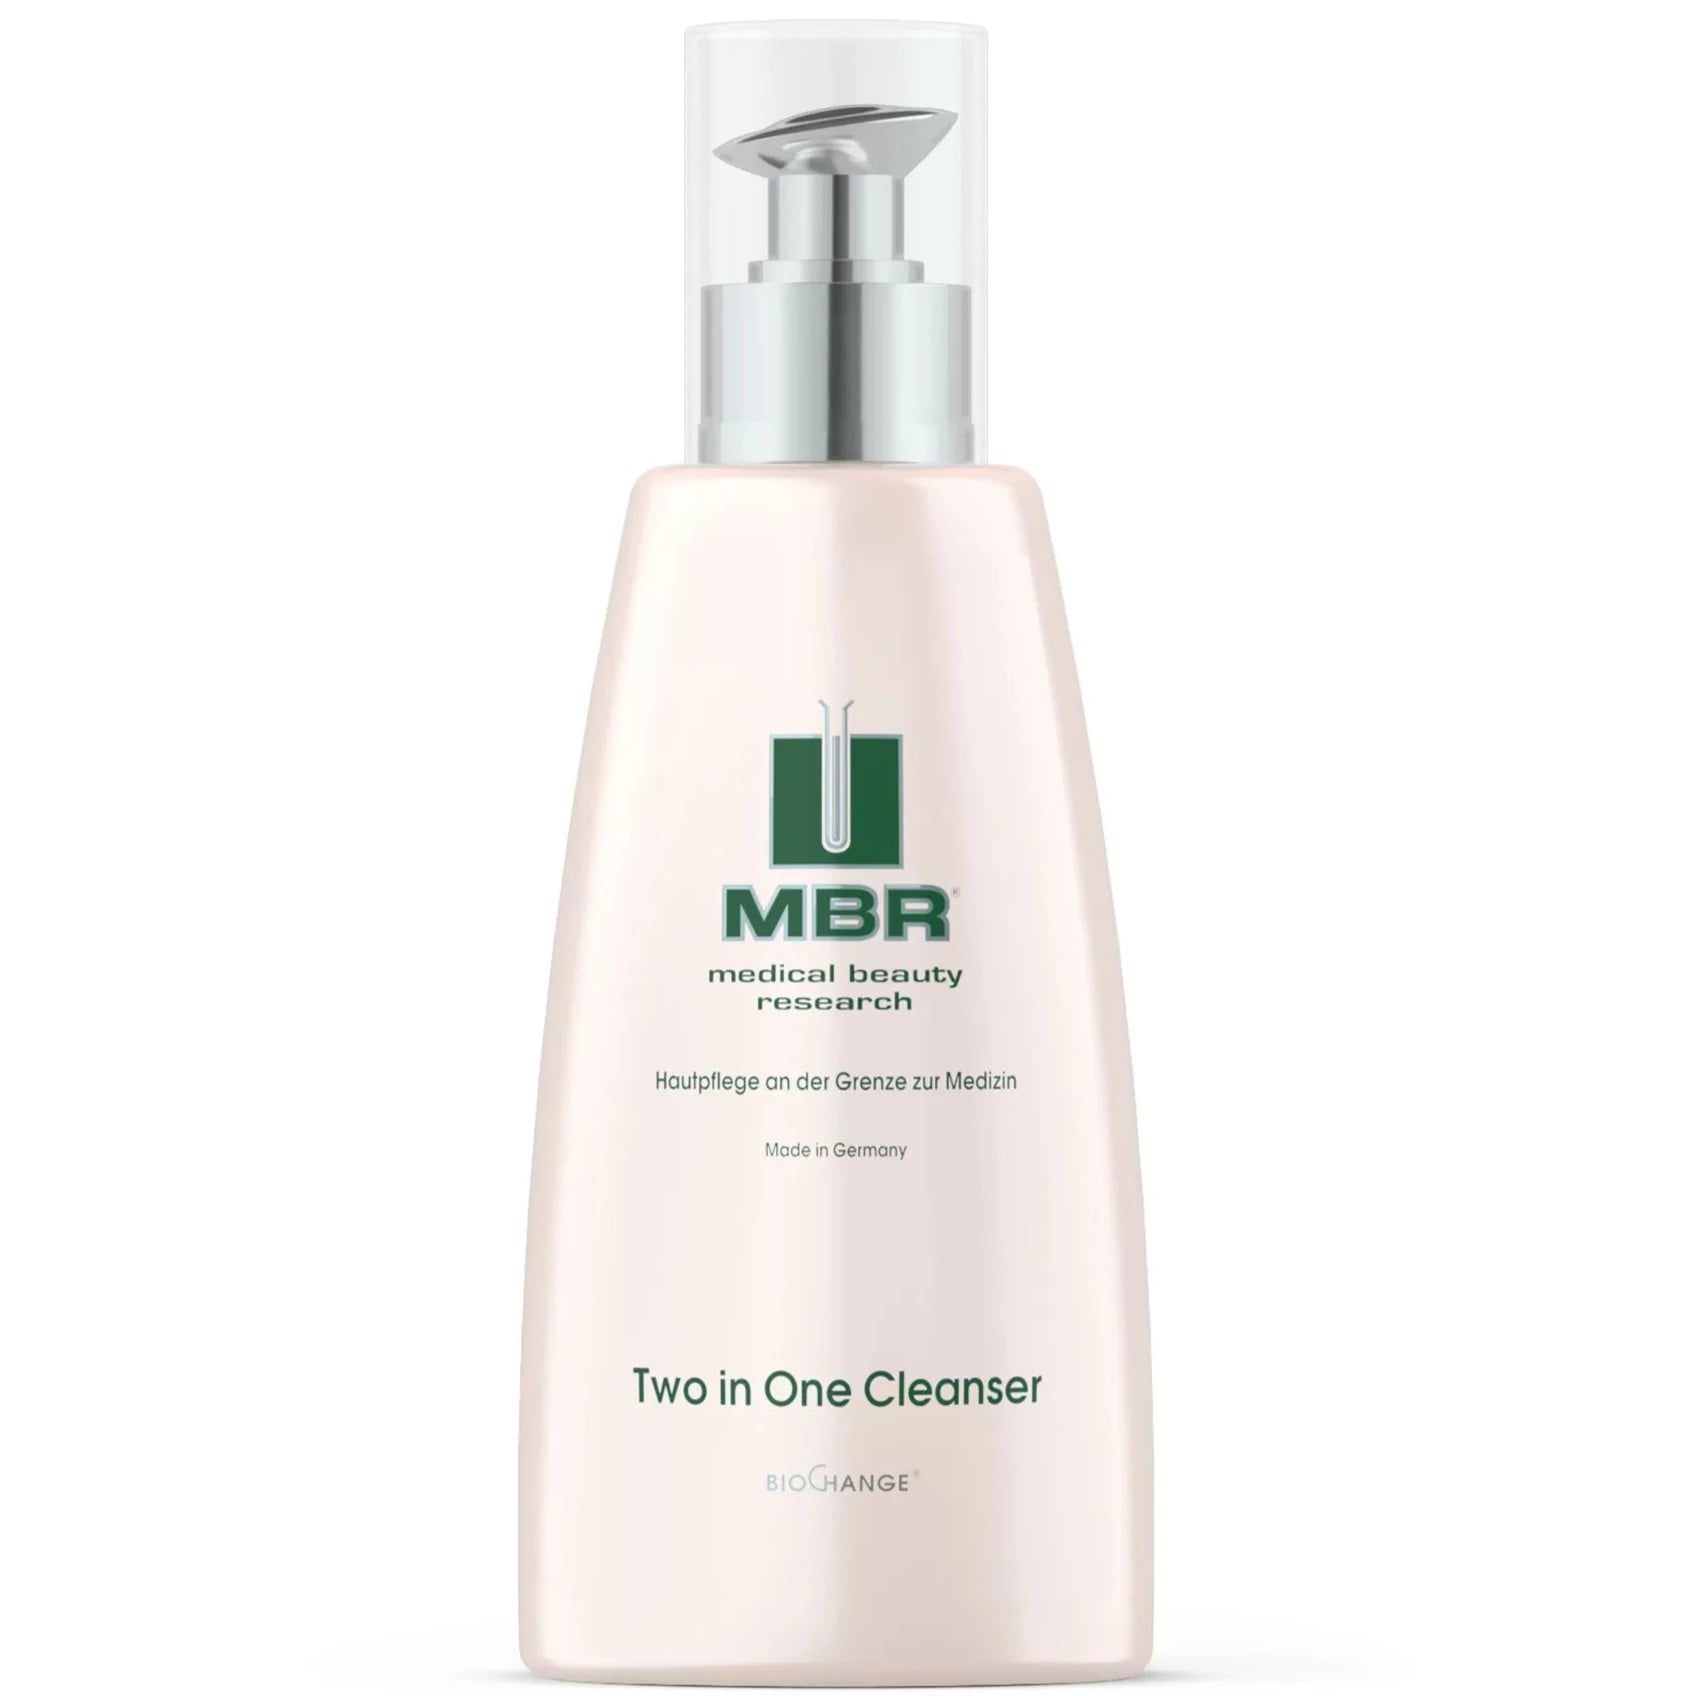 Two in One Cleanser